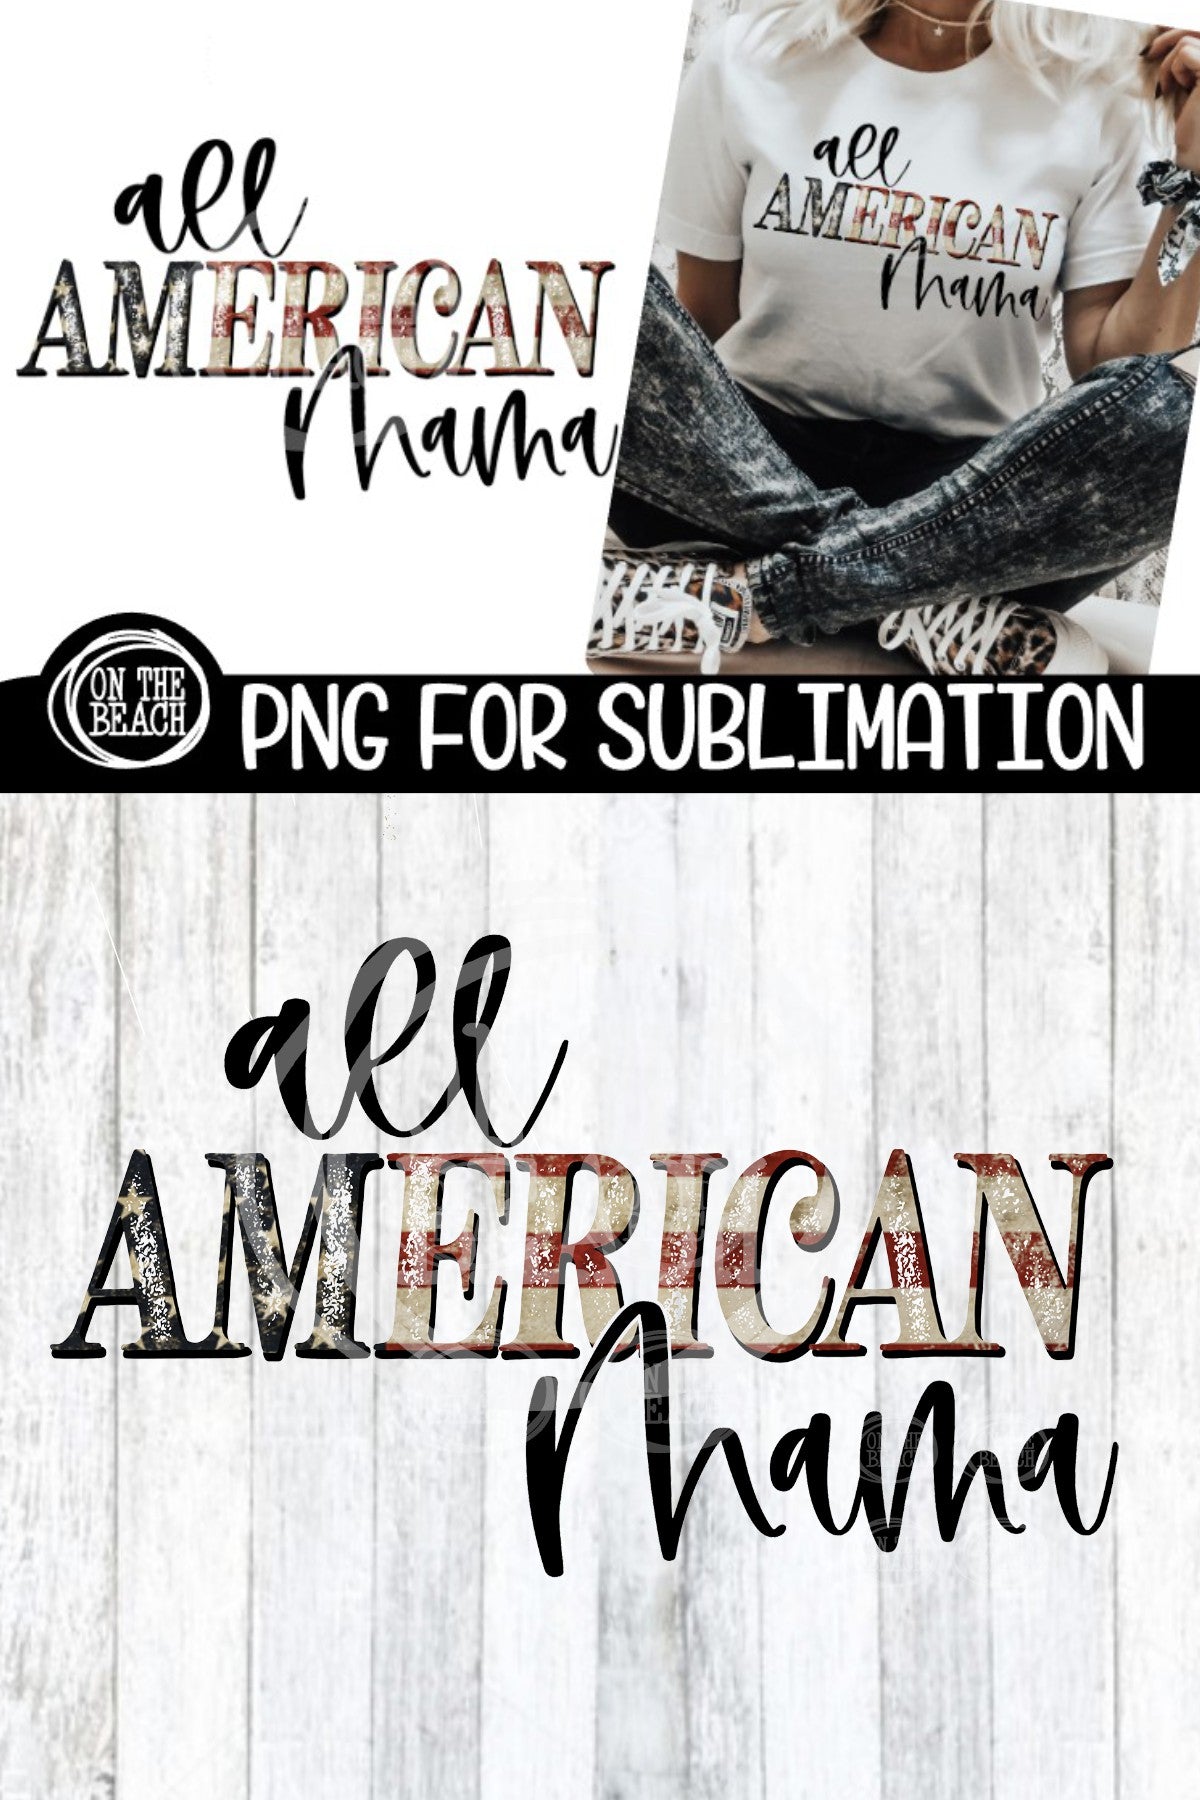 All American Mama- Vintage Flag - PNG for Sublimation